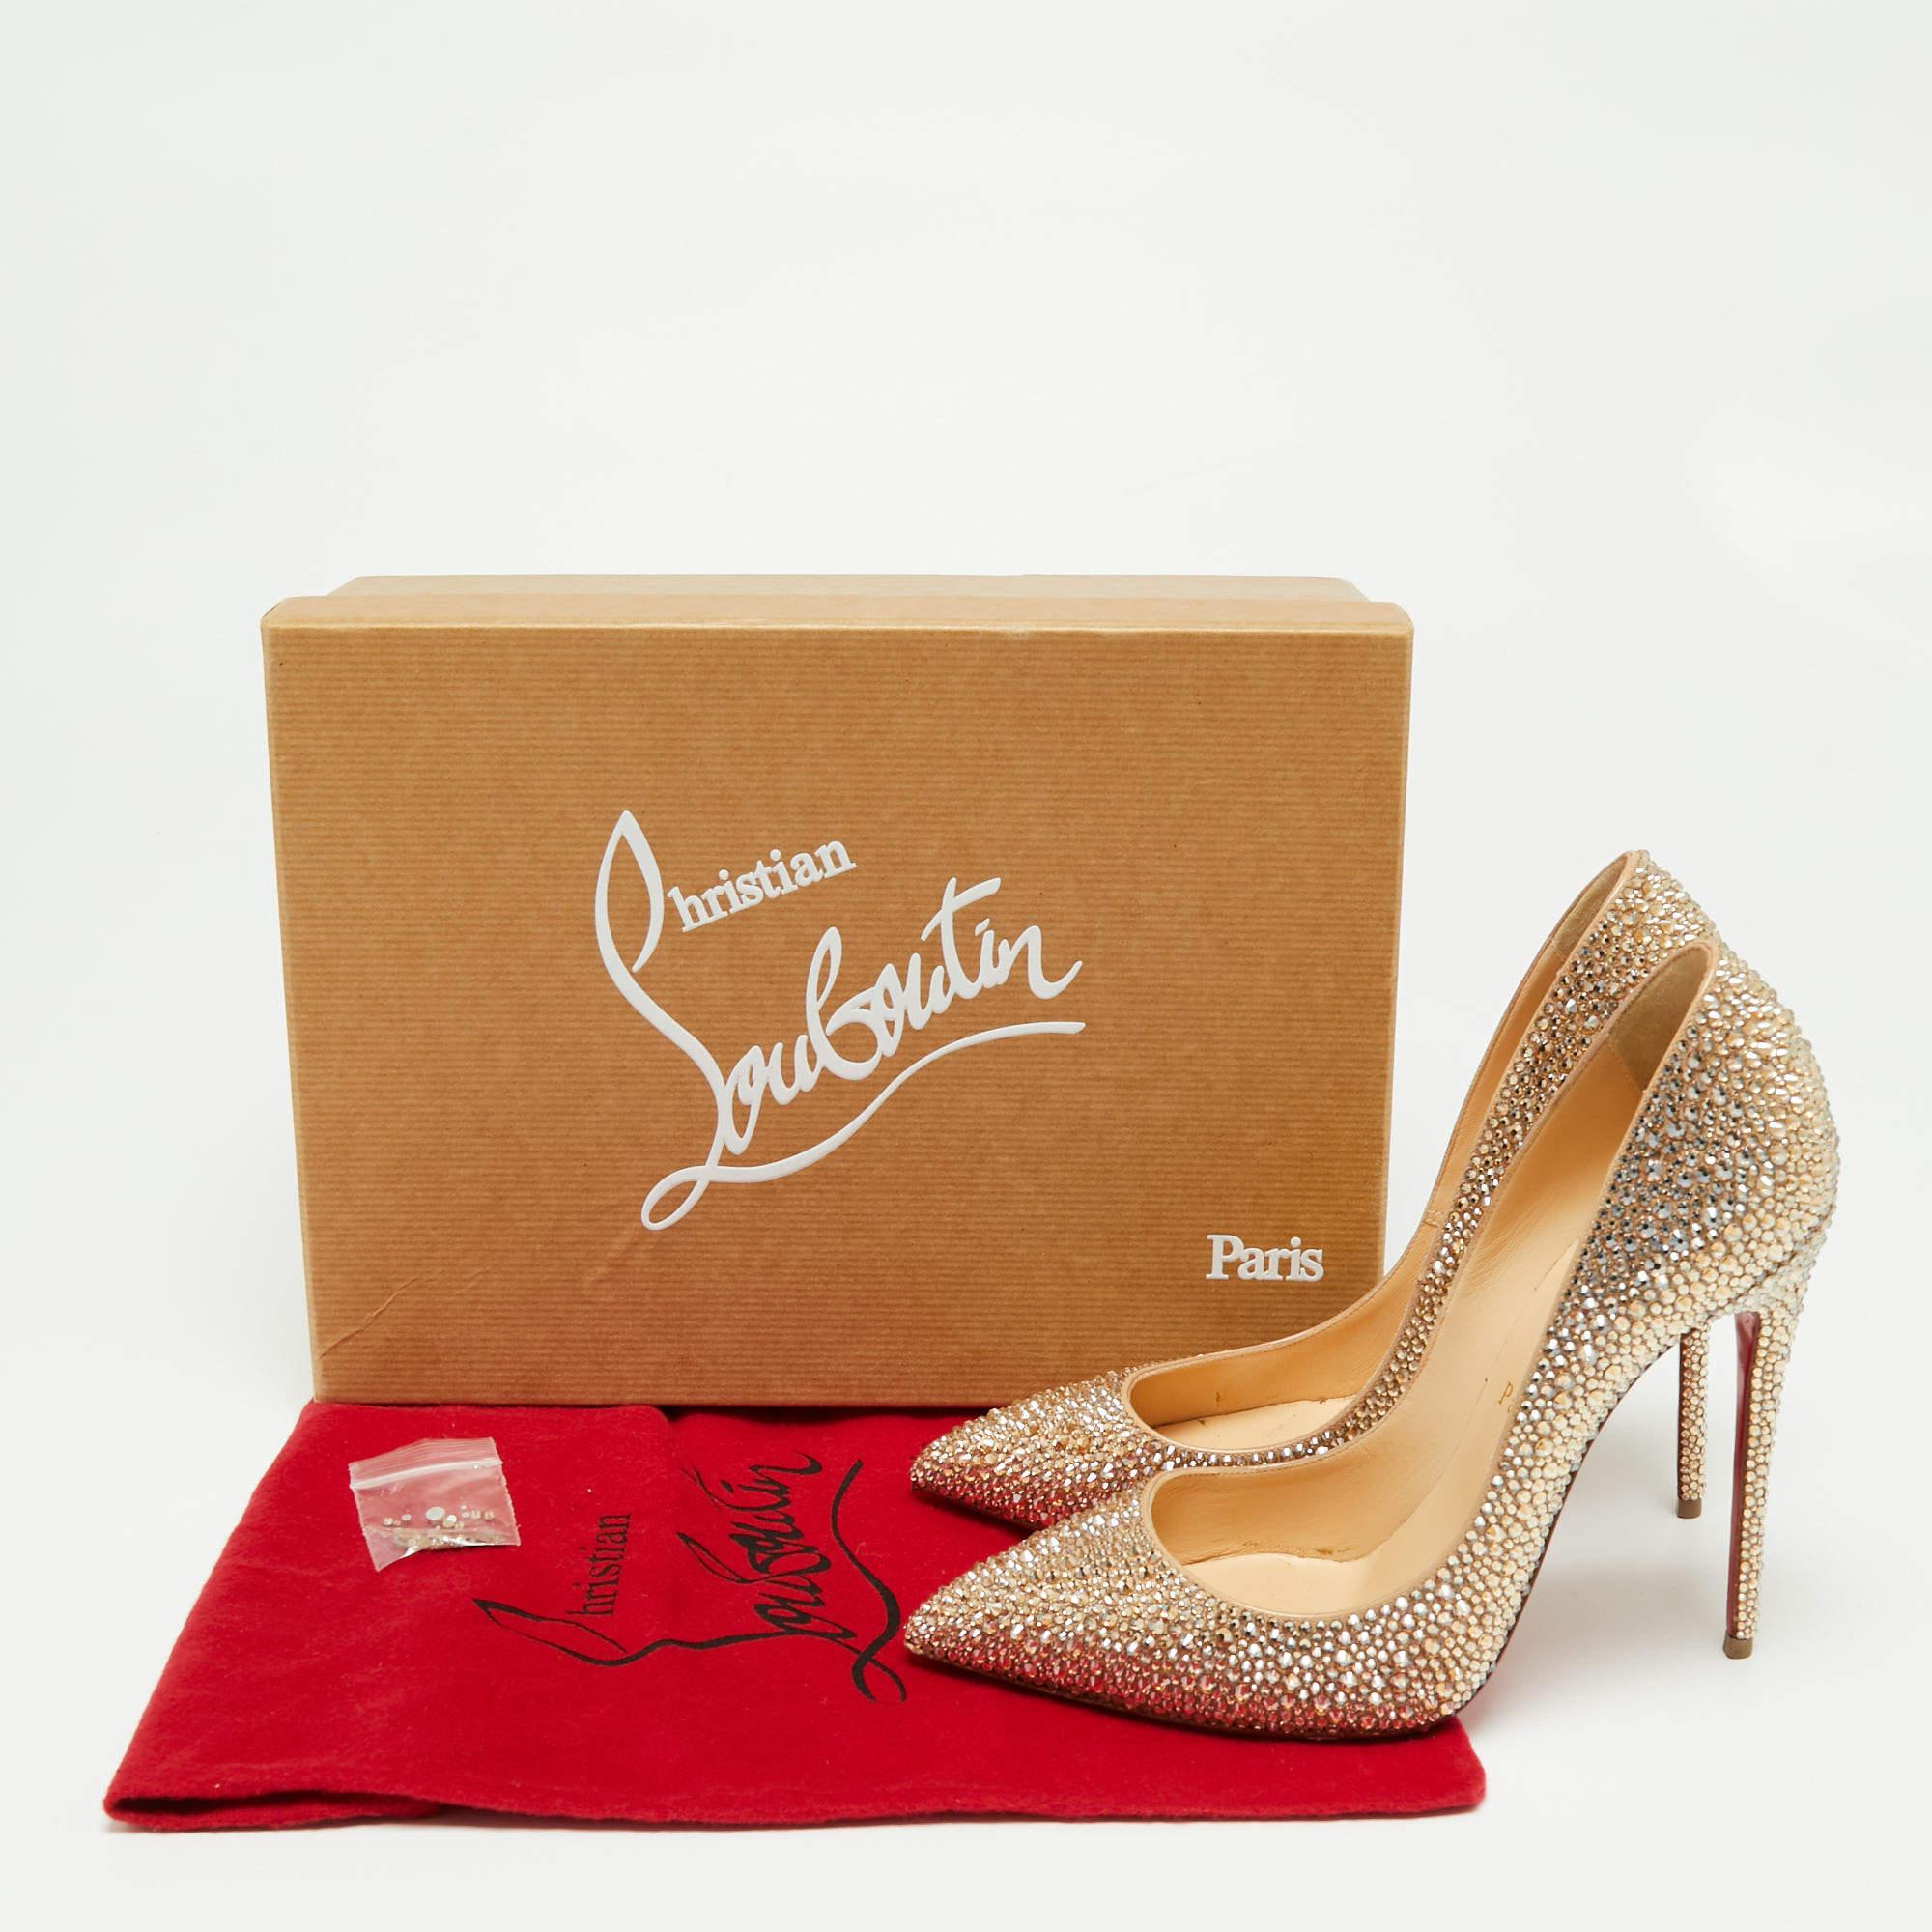 Christian Louboutin Beige Strass 120 Crystal Pigalle Follies Pumps Size 38.5 4